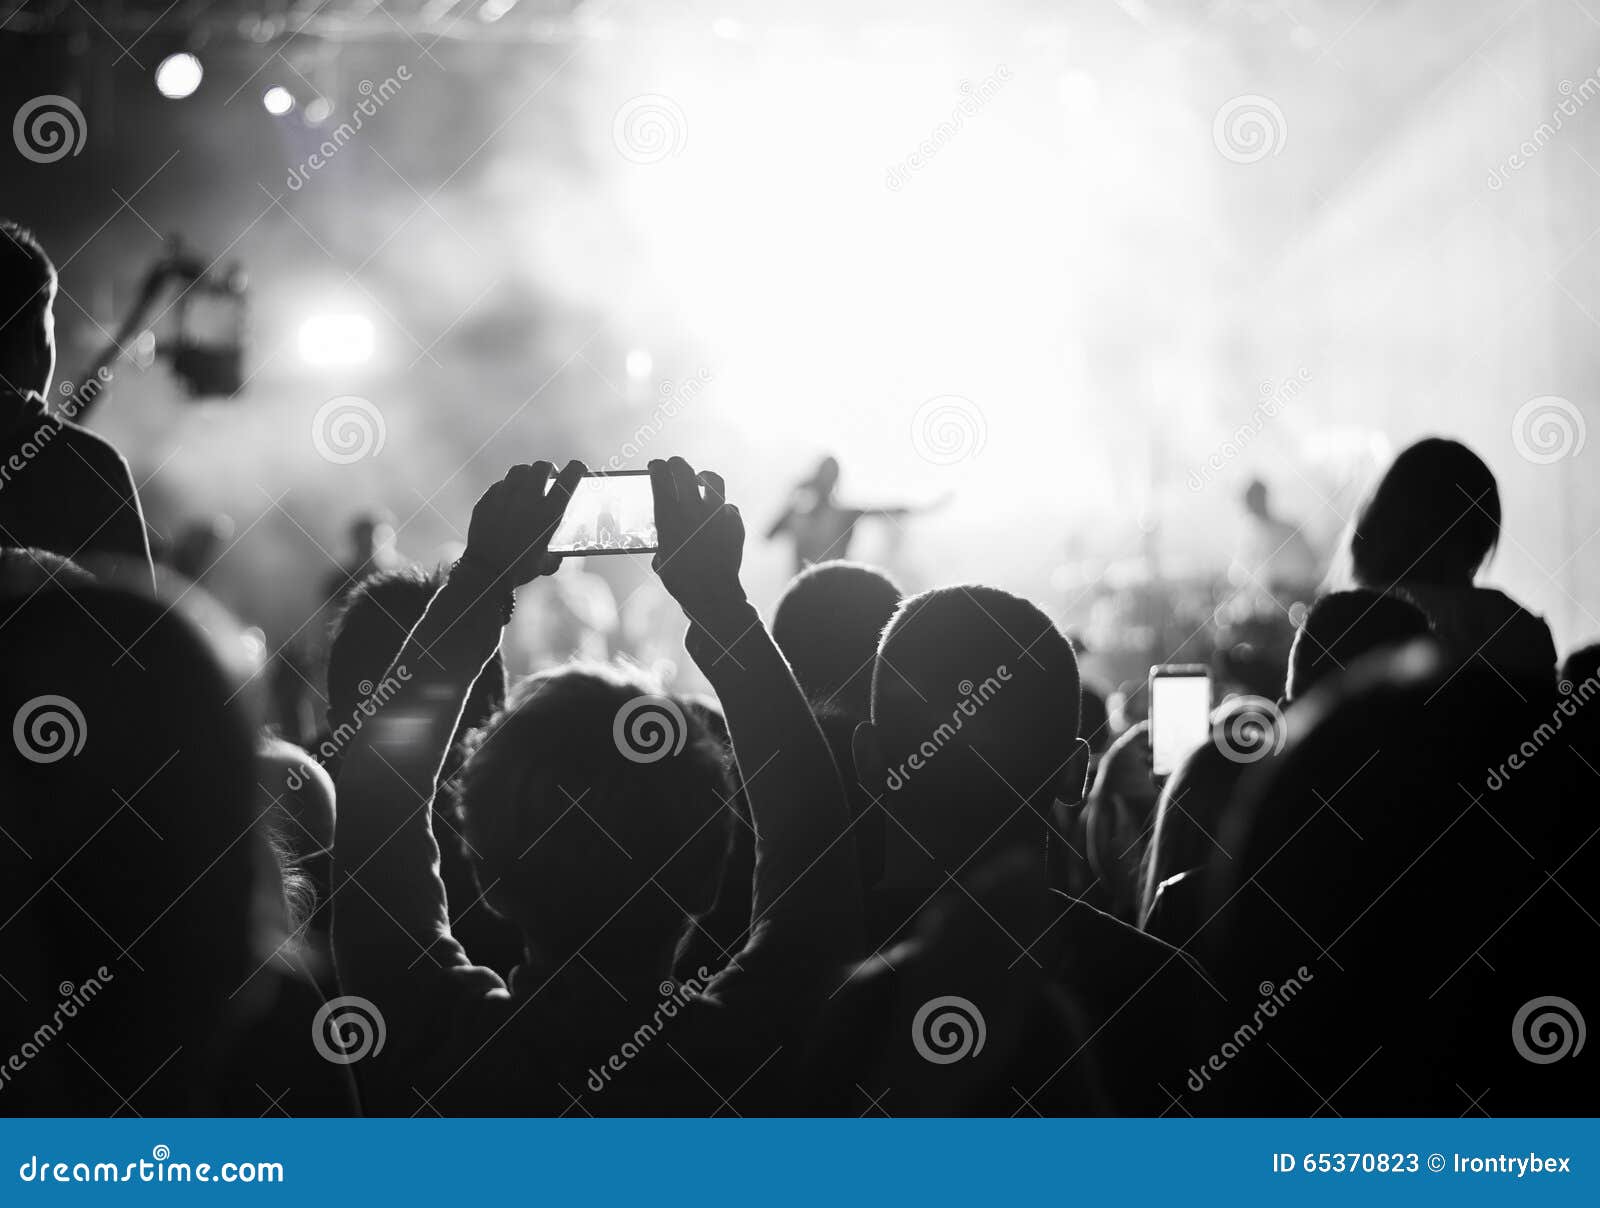 supporters recording at concert, black and white